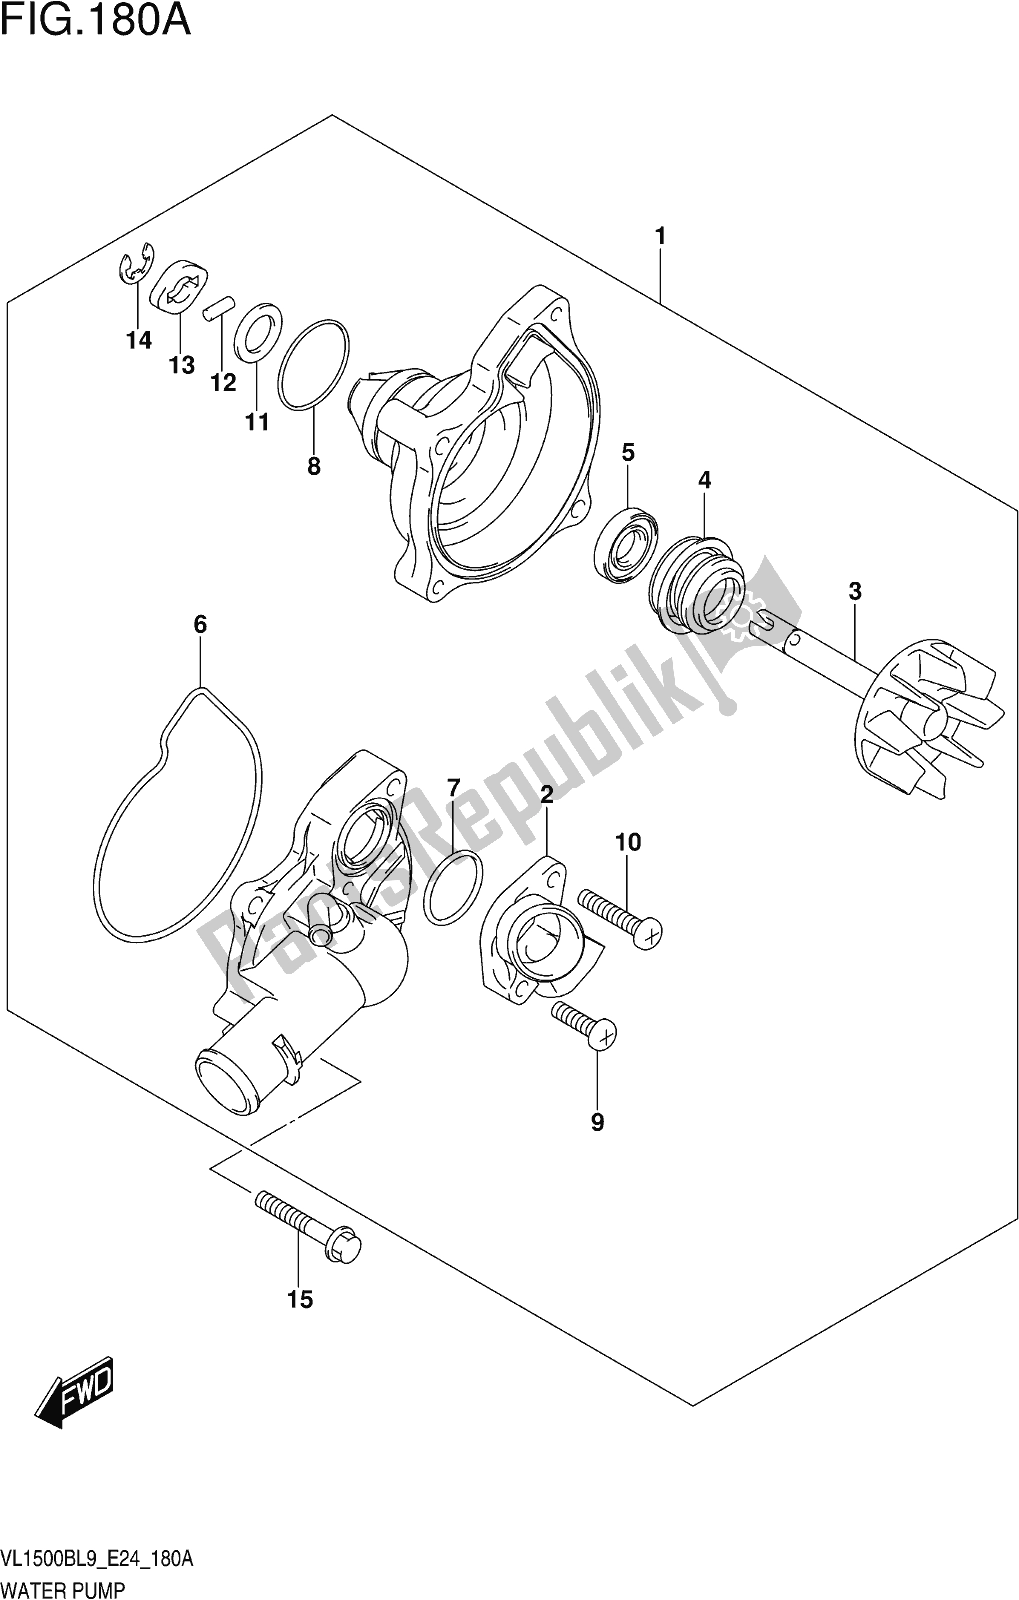 All parts for the Fig. 180a Water Pump of the Suzuki VL 1500B 2019